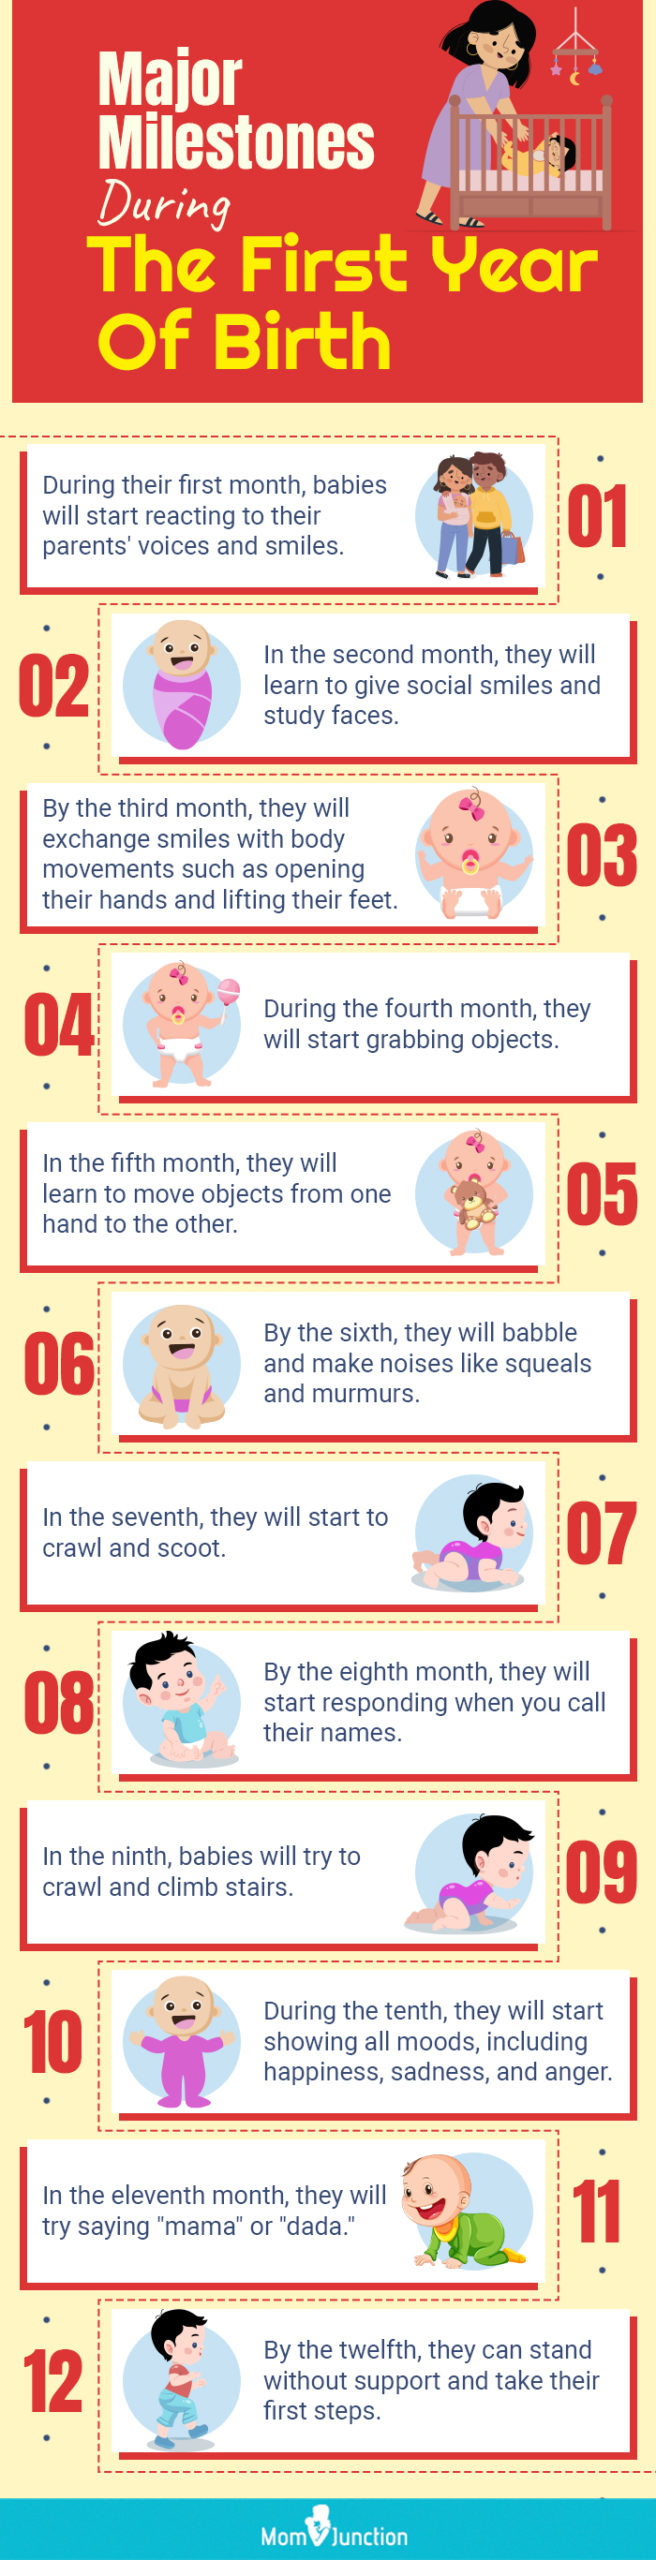 major milestones during the first year of birth (infographic)